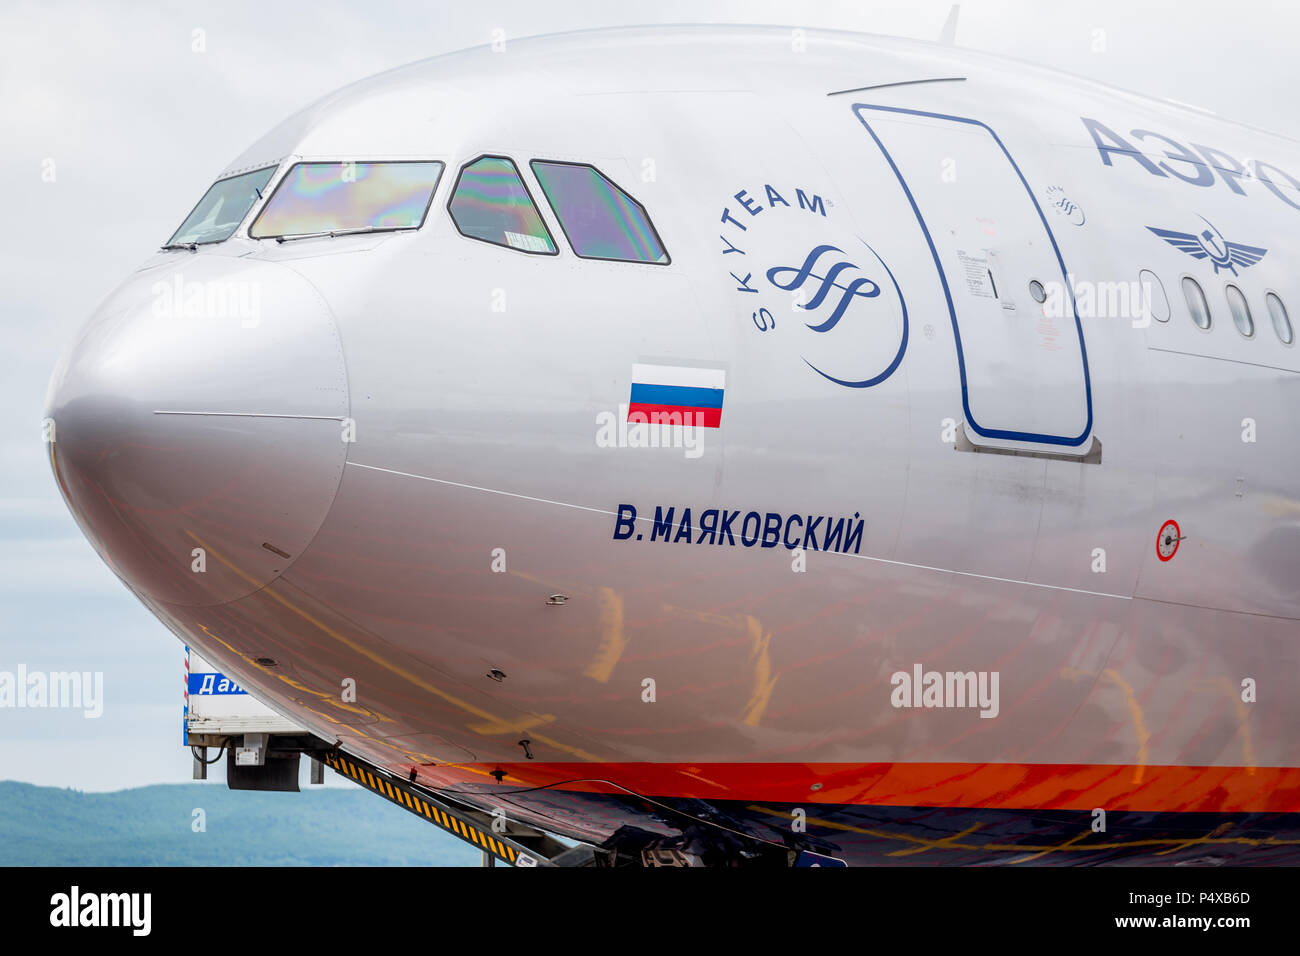 Russia, Vladivostok, 05/26/2017. Fuselage of passenger airplane Airbus A330-300 of of Aeroflot company. This airplane has own name 'V. Mayakovsky' in  Stock Photo